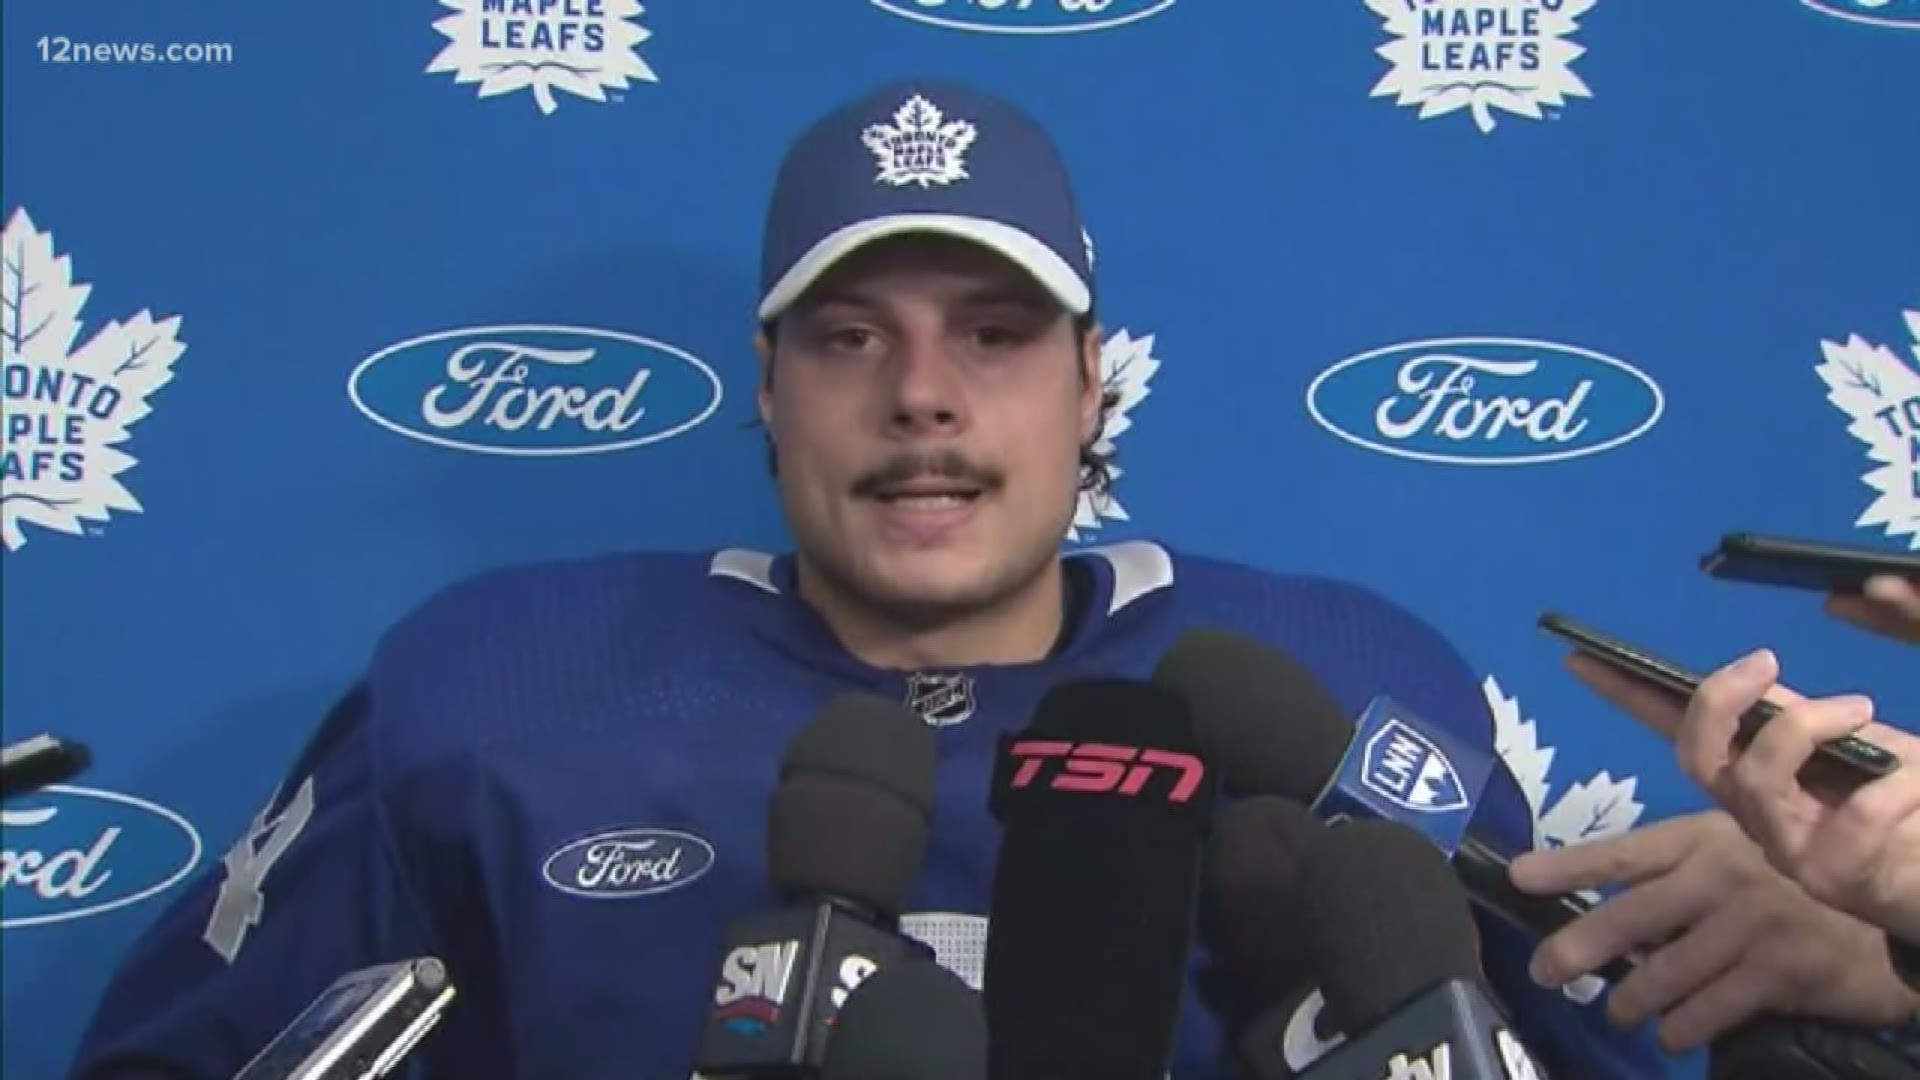 Body camera video was released of an interview with a security guard who said hockey player Auston Matthews traumatized while she worked as a security guard.